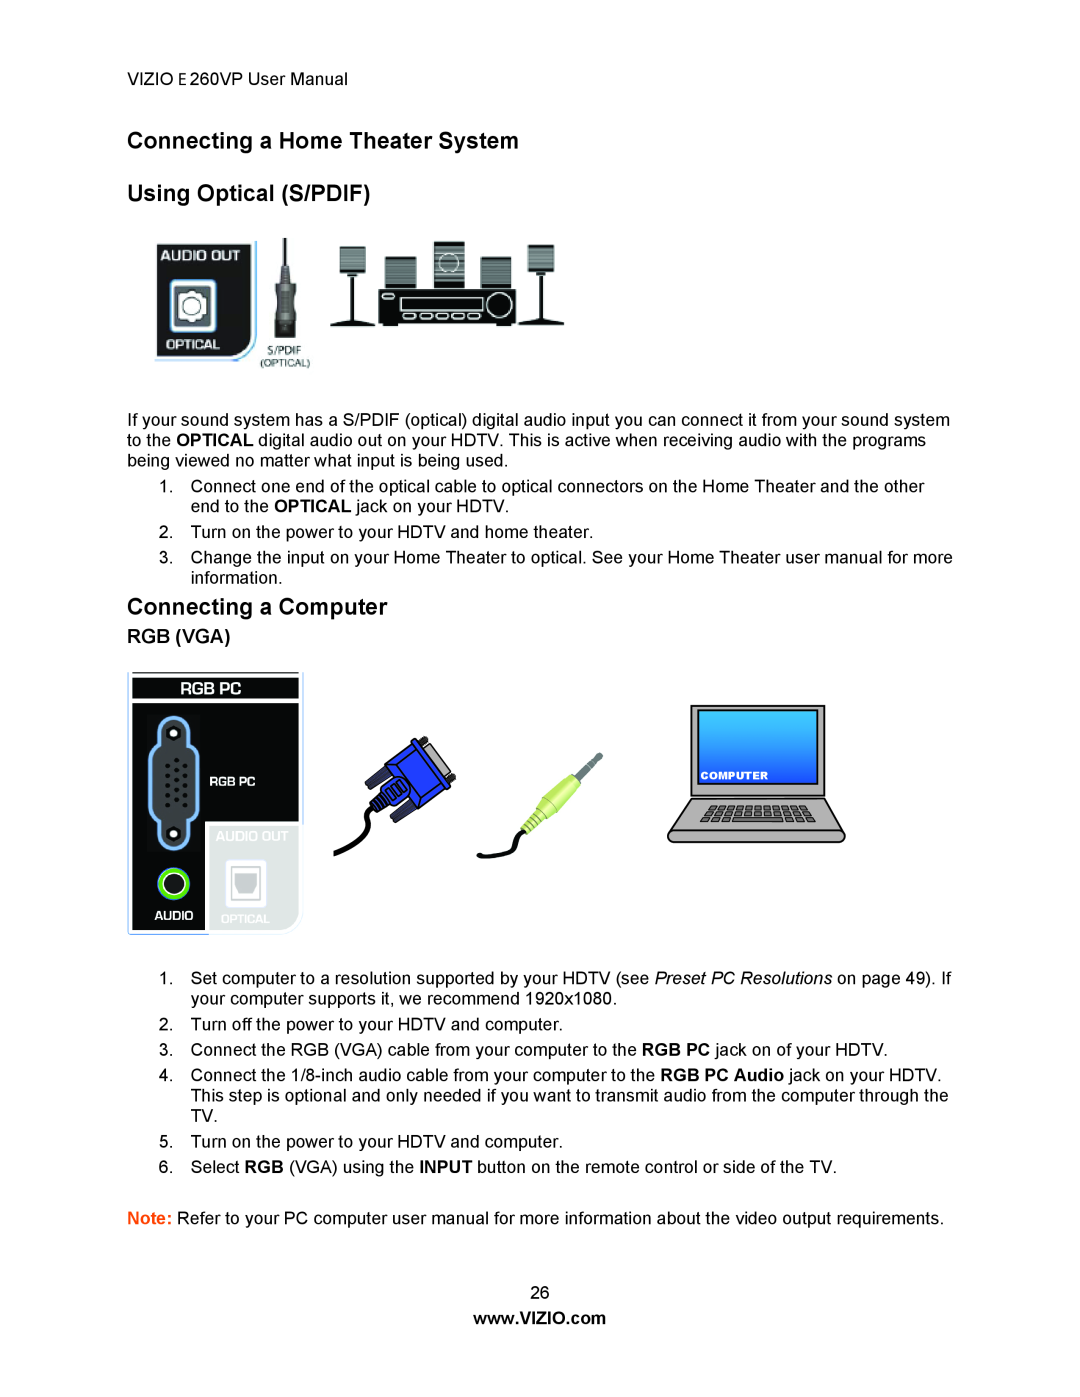 Vizio E260VP user manual Connecting a Home Theater System Using Optical S/PDIF, Connecting a Computer, Rgb Vga 